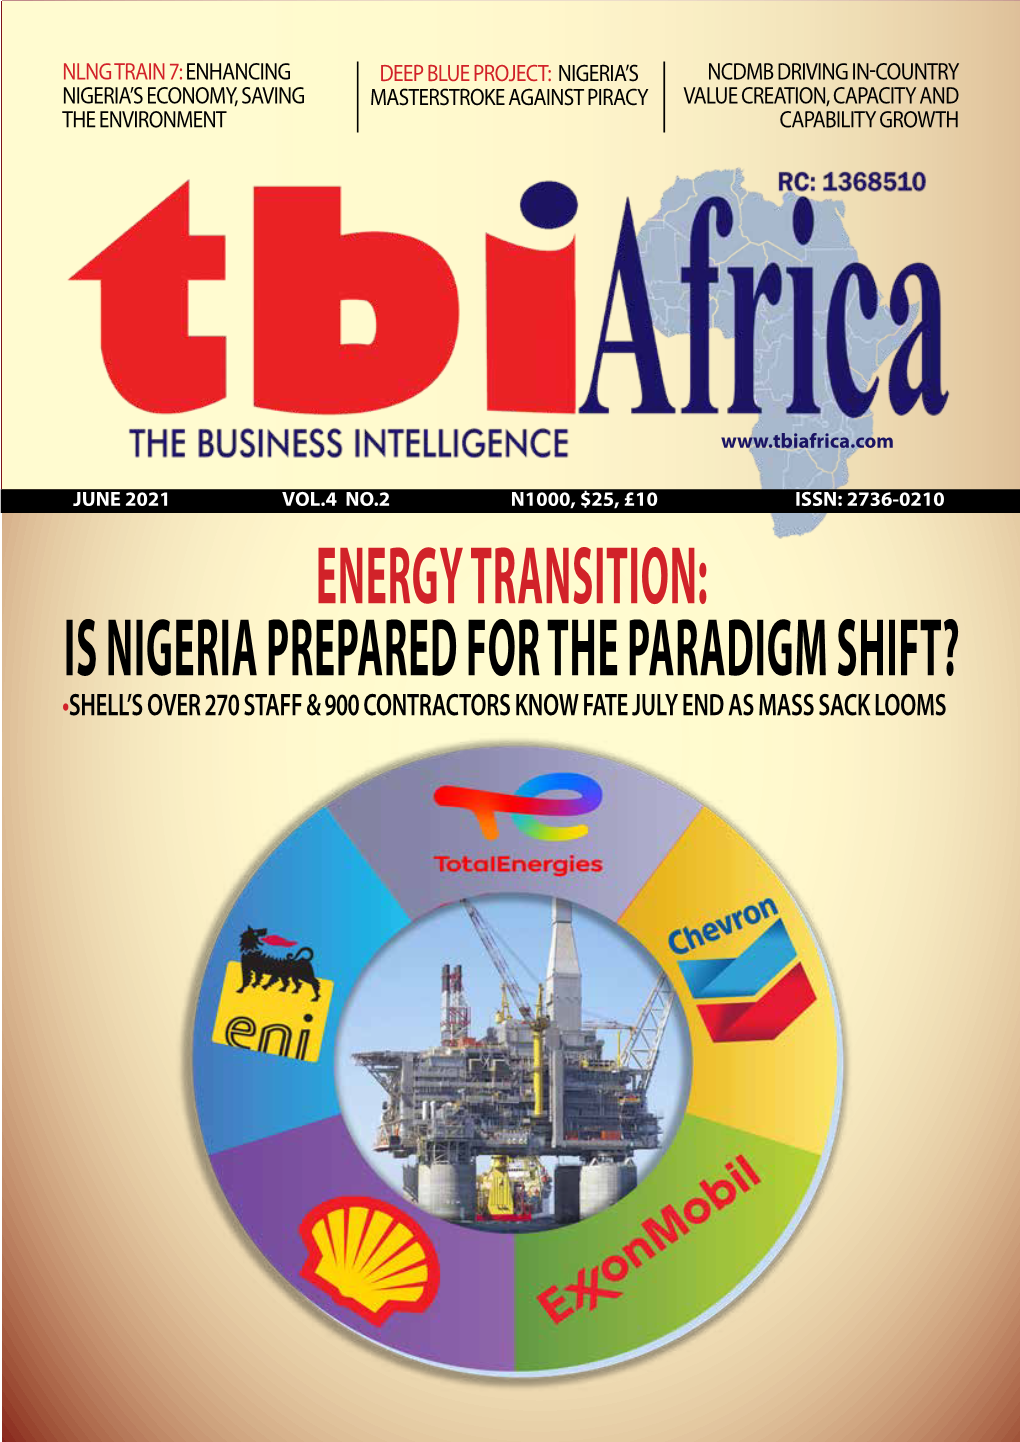 ENERGY TRANSITION: IS NIGERIA PREPARED for the PARADIGM SHIFT? •SHELL’S OVER 270 STAFF & 900 CONTRACTORS KNOW FATE JULY END AS MASS SACK LOOMS Energy JUNE 2021